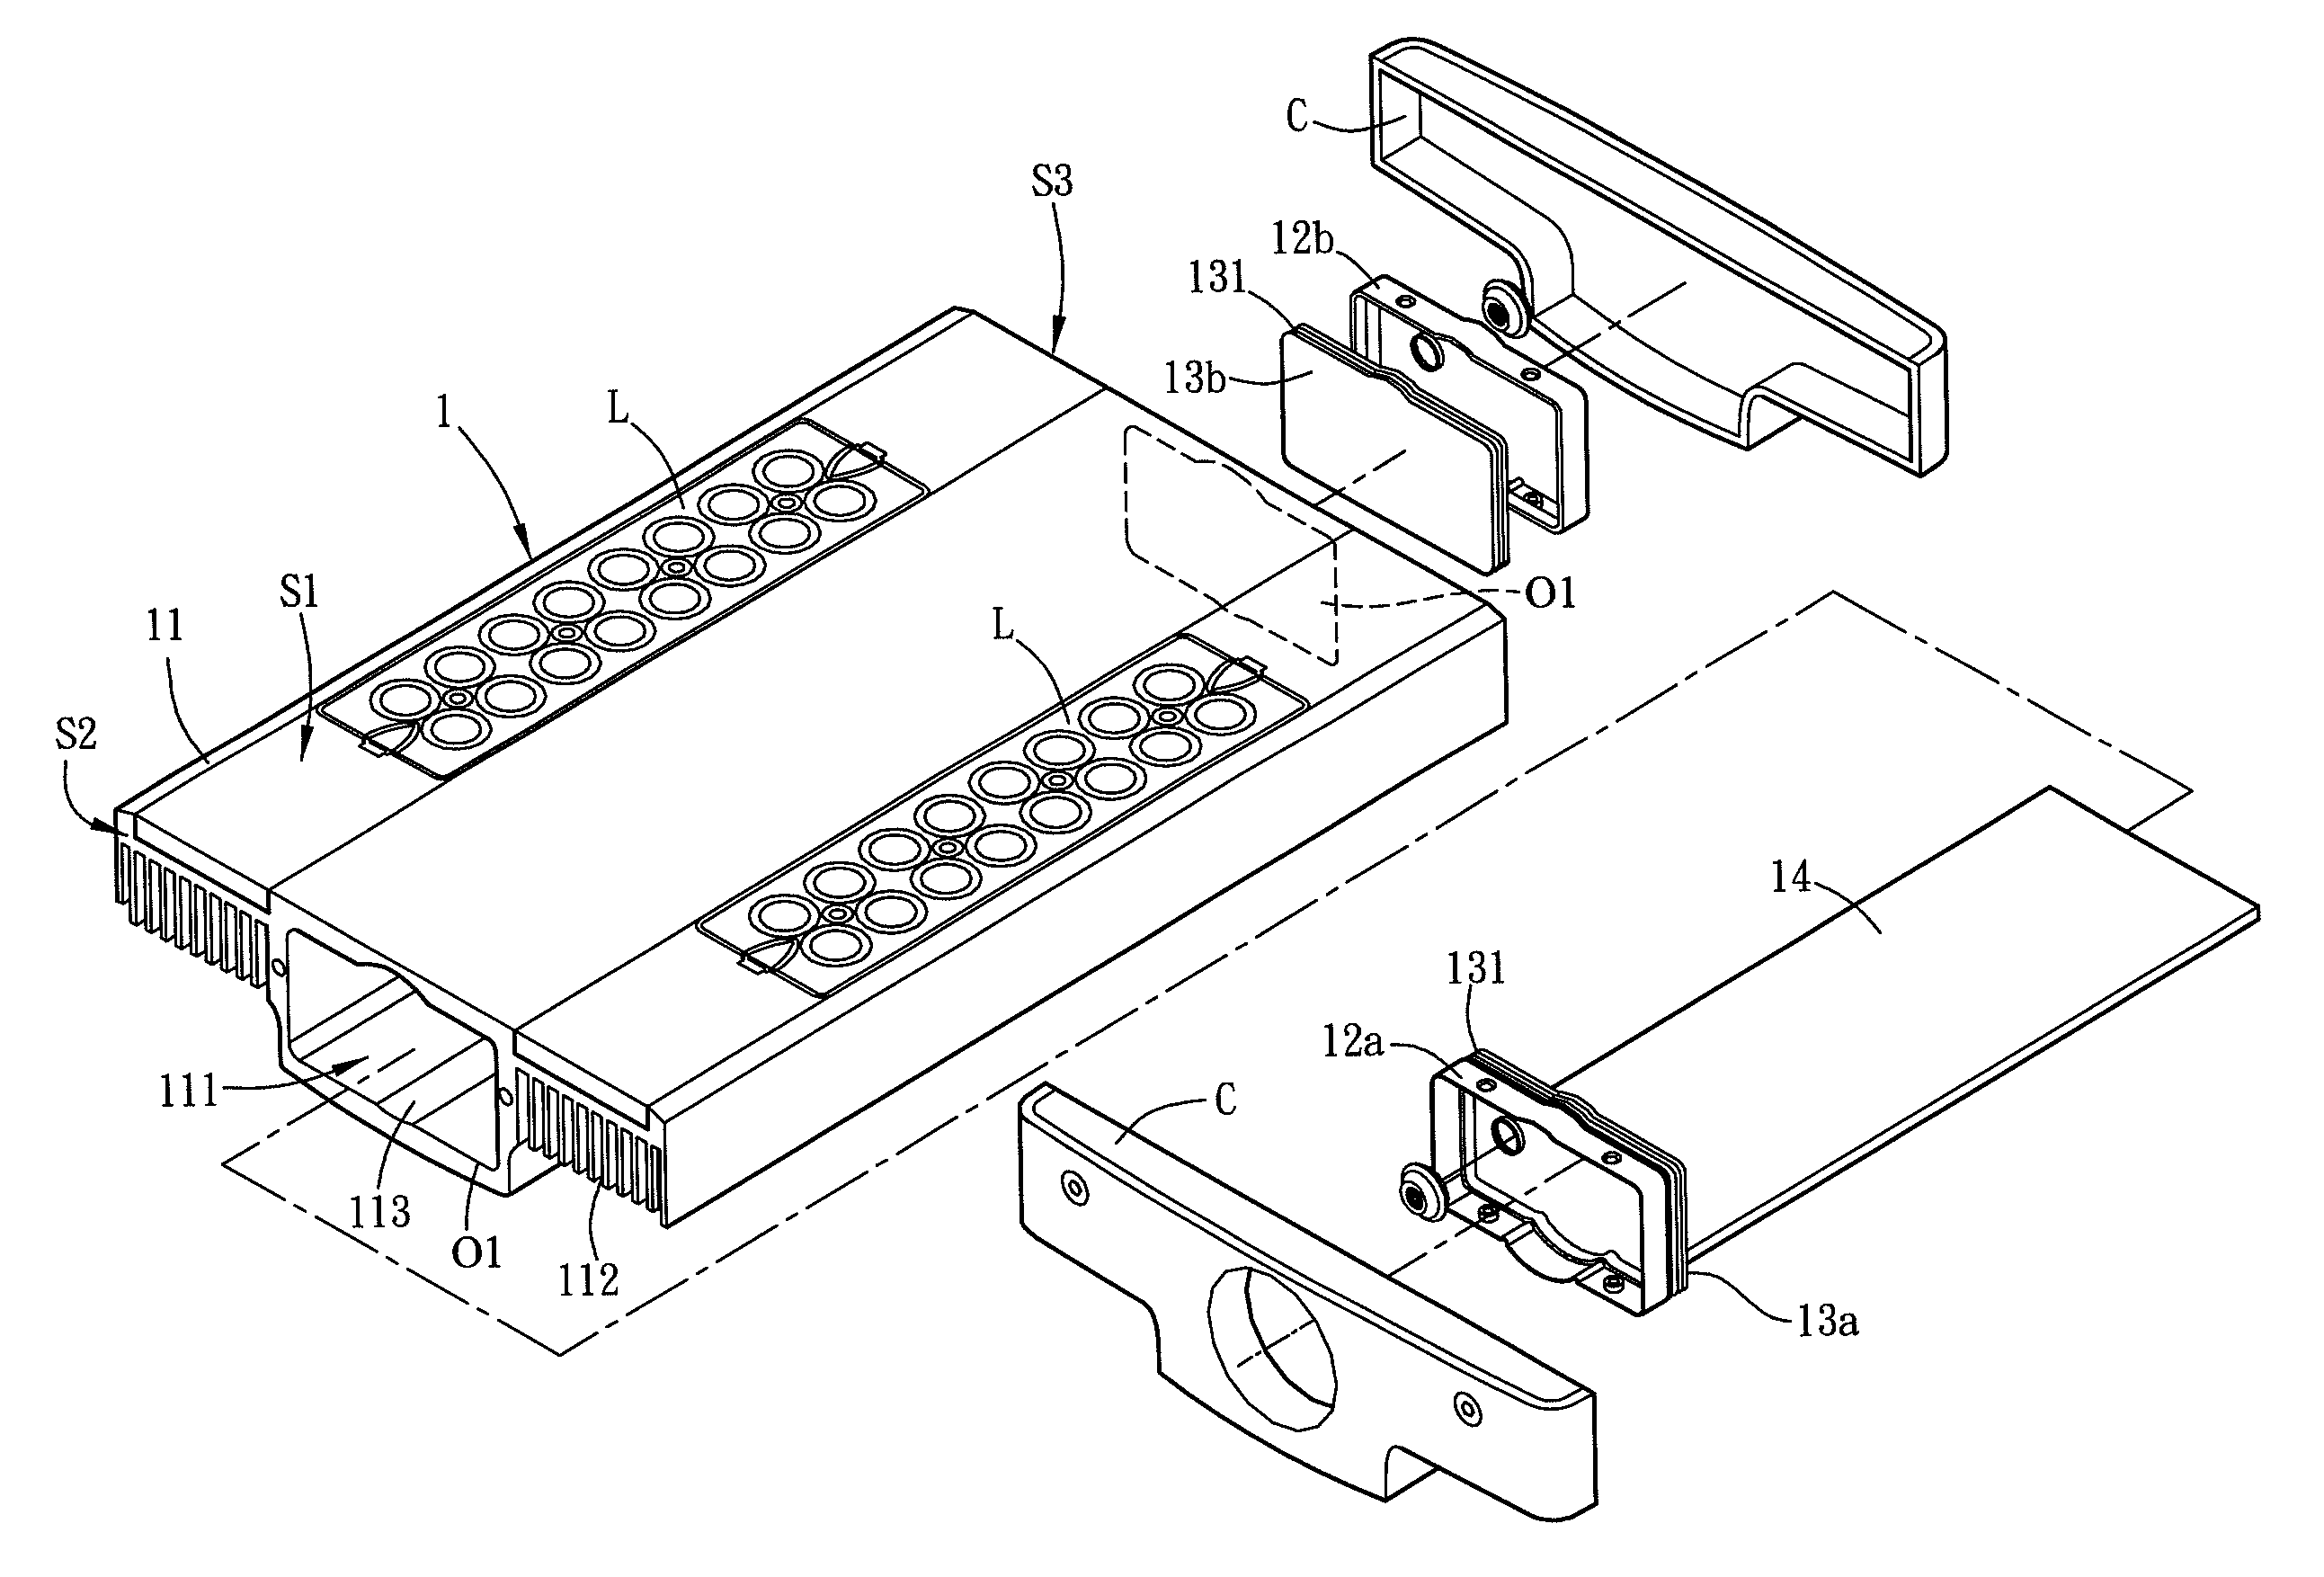 Waterproof apparatus for outdoor lighting with electronic device sealed in cavity of an aluminum extrusion